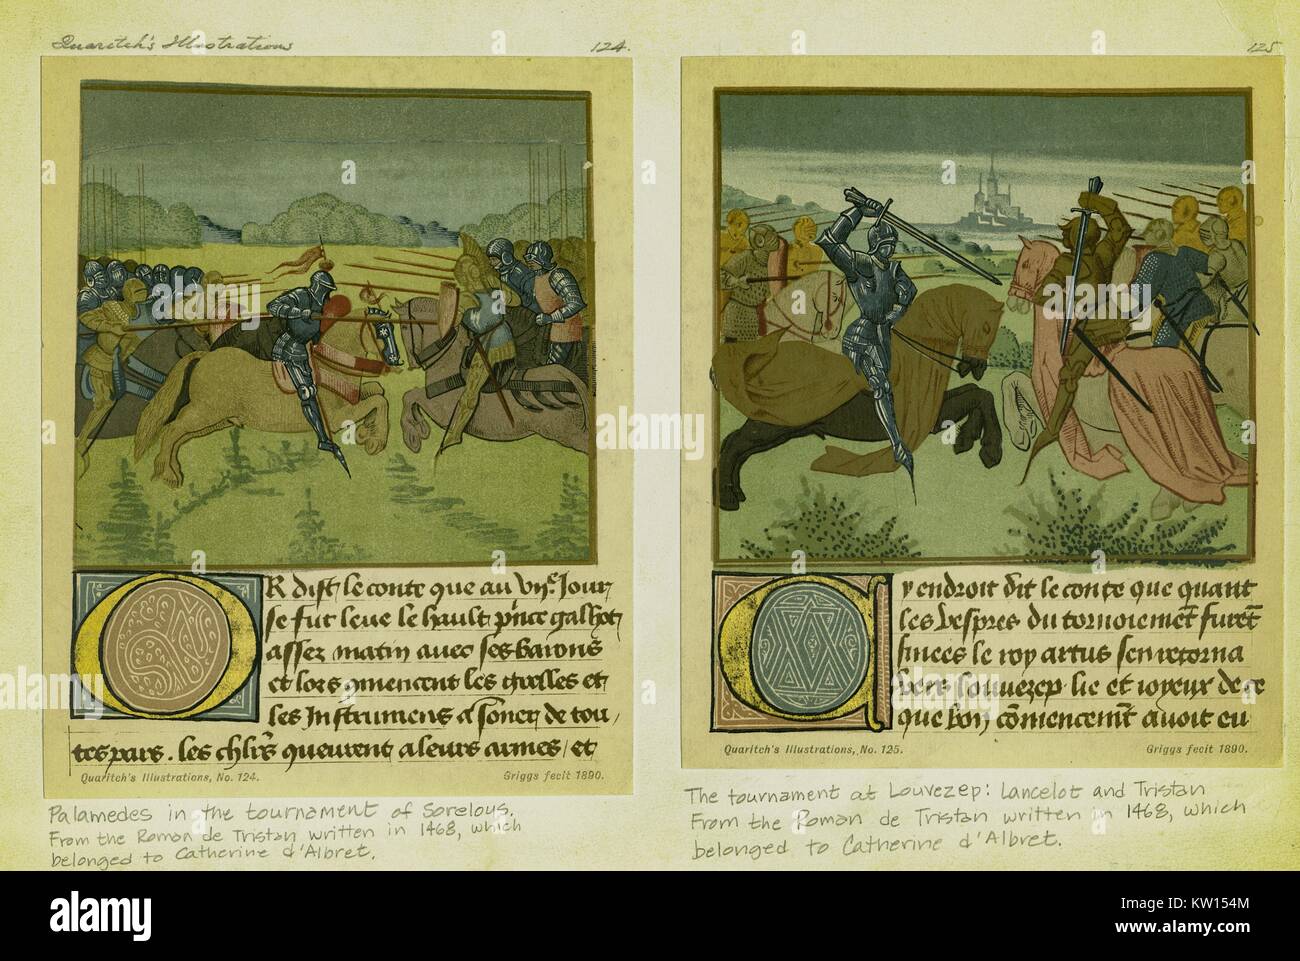 Illustrations of Palamedes in the tournament of Soreloys and Lancelot and Tristan in the tournament at Louvezep, from the Roman de Tristan, 1468. From the New York Public Library. Stock Photo